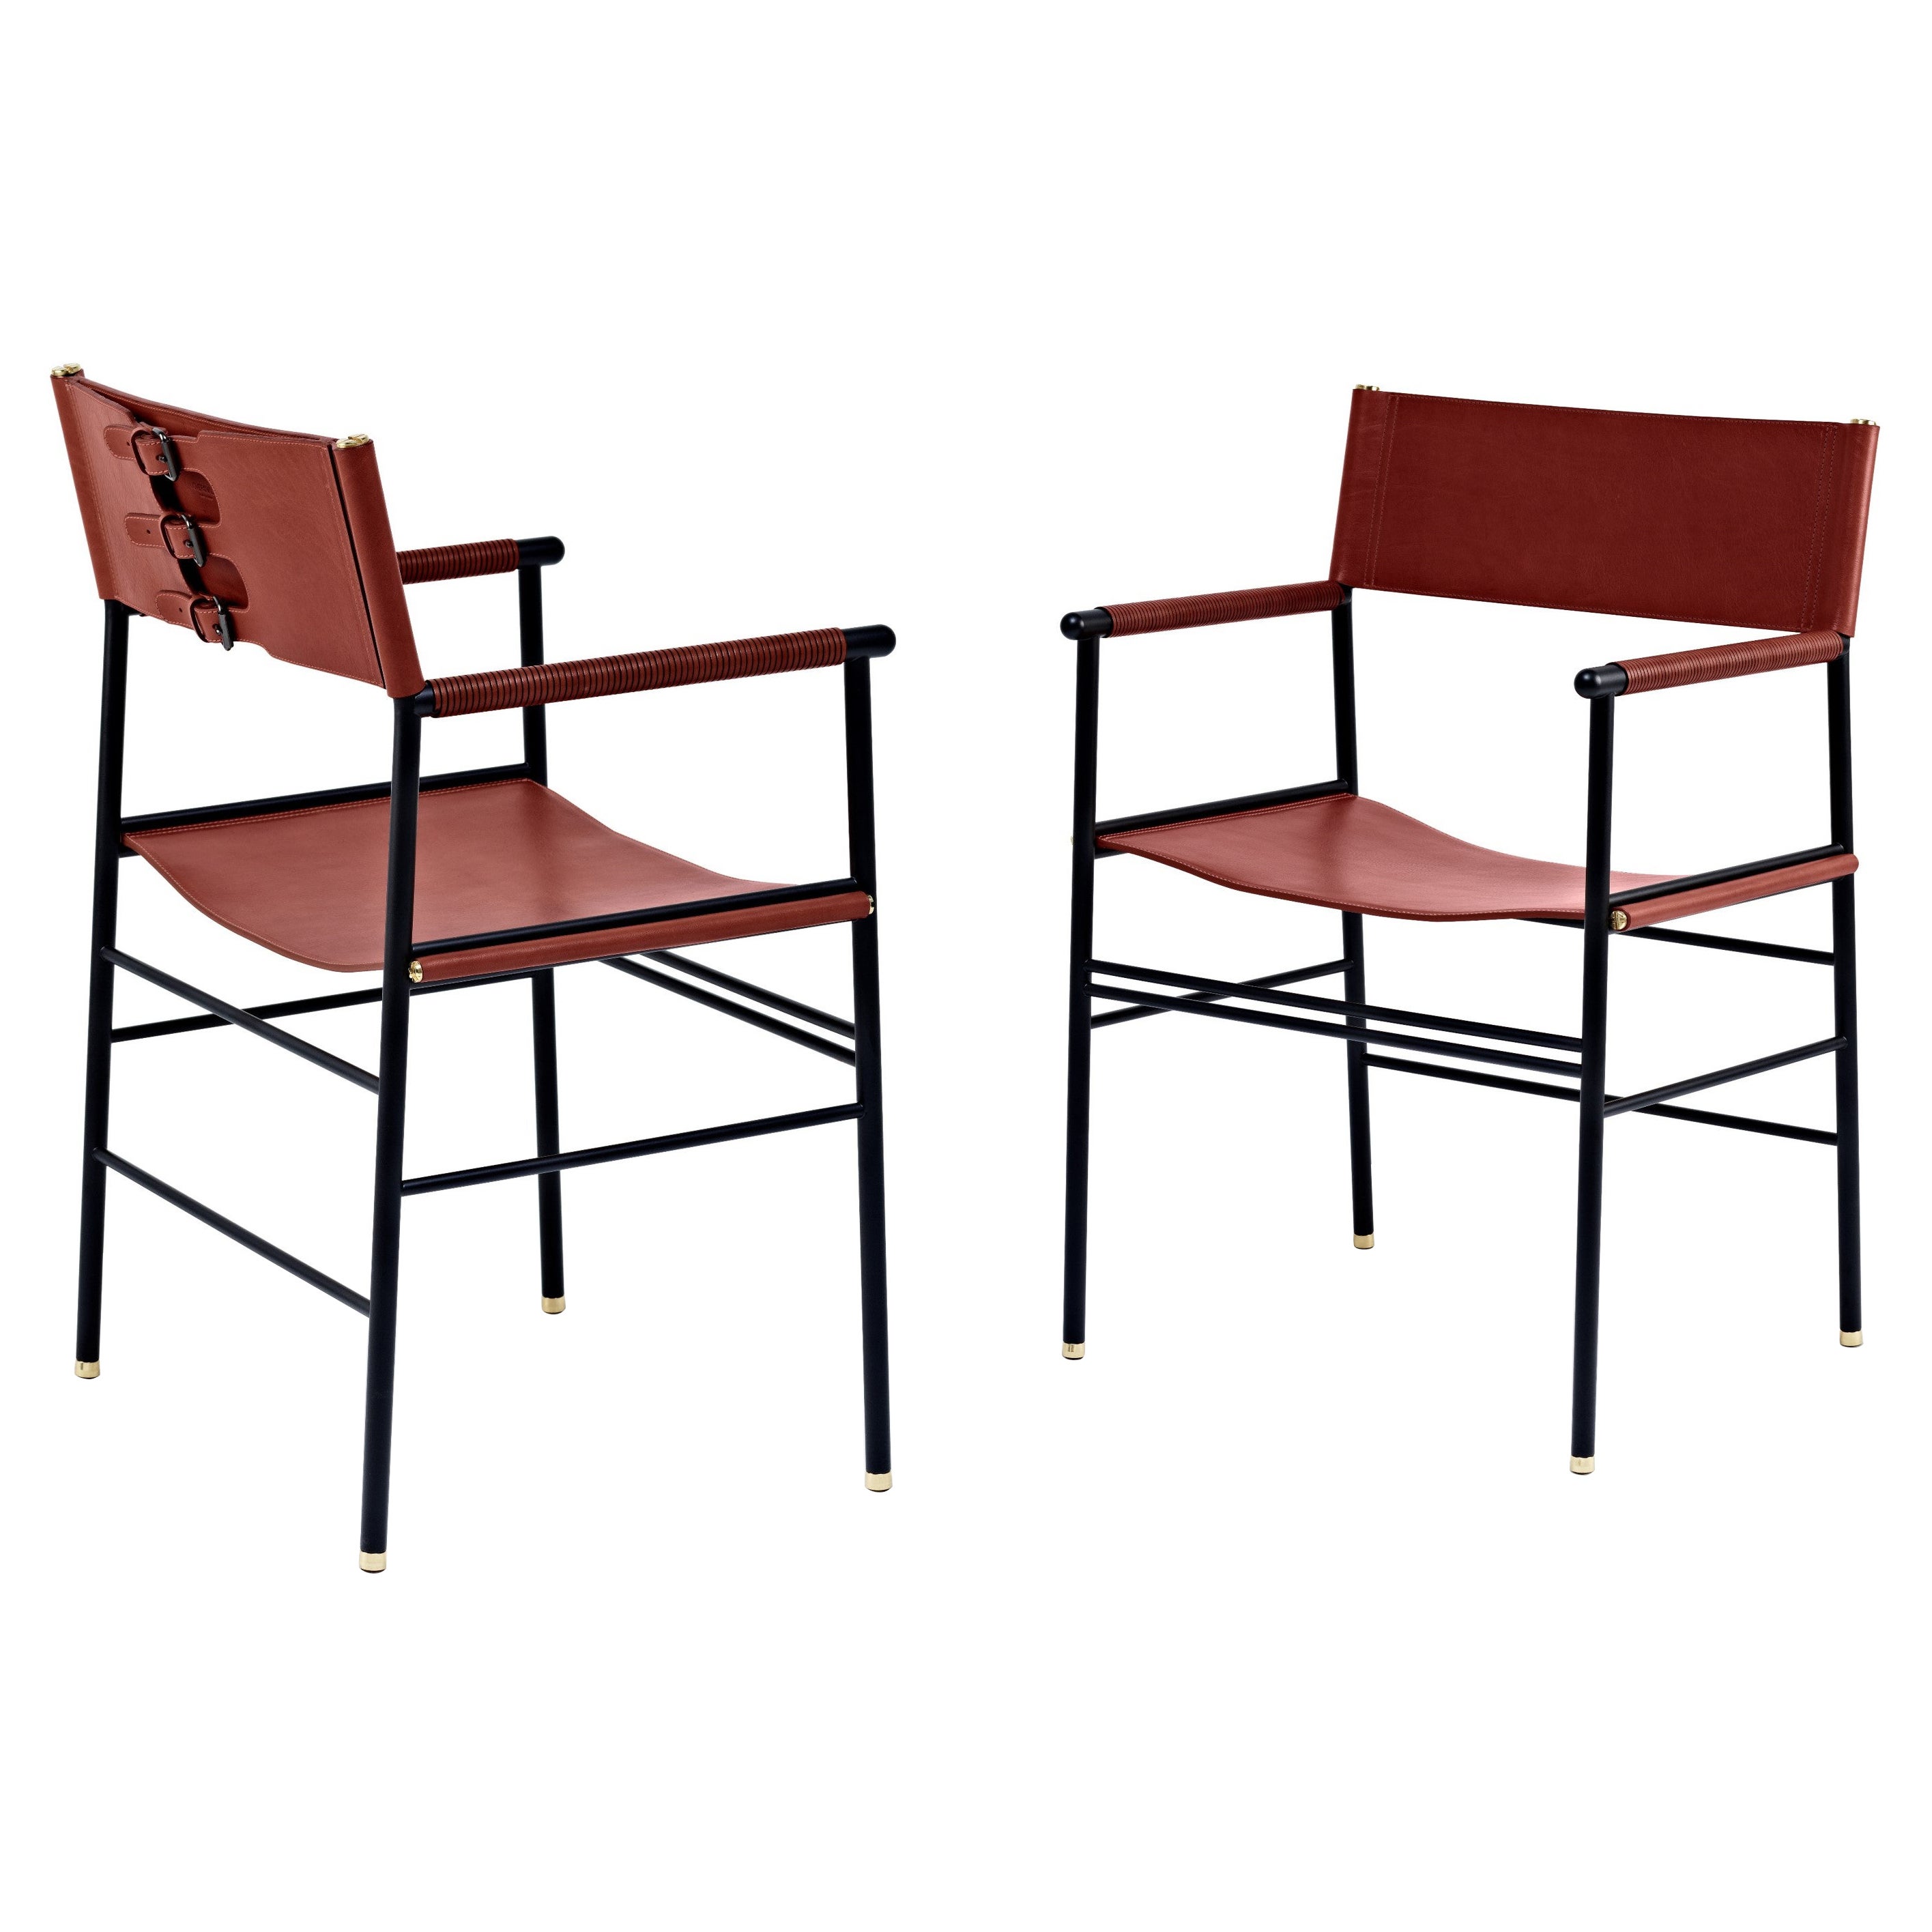 Set of 2 Handmade Contemporary Chair Cognac Leather & Black Rubbered Metal For Sale